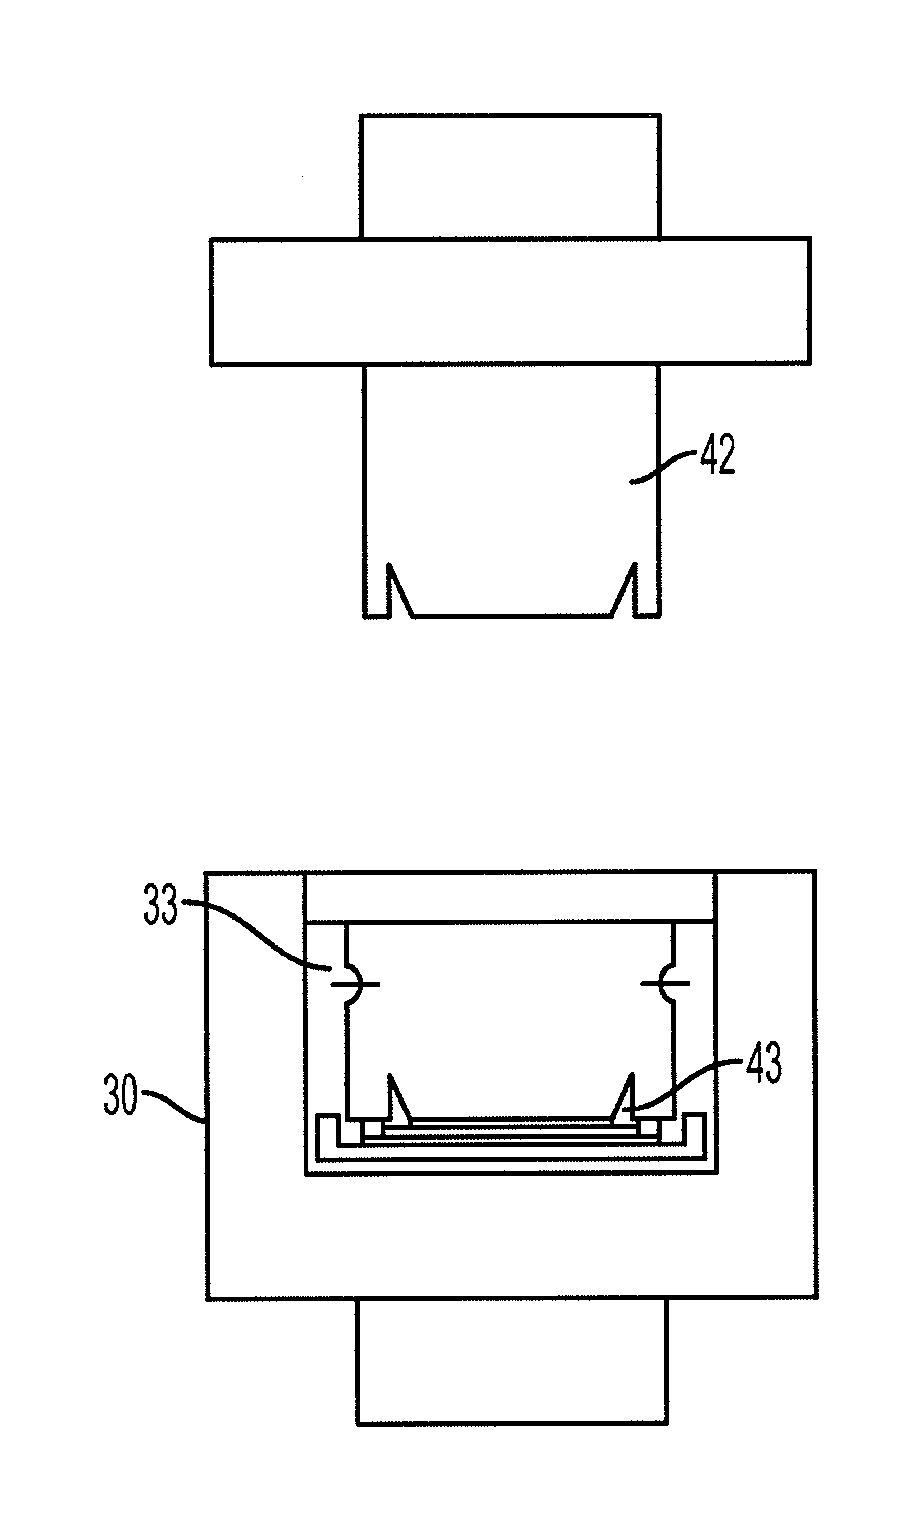 Multi-layer structure and method of producing the same